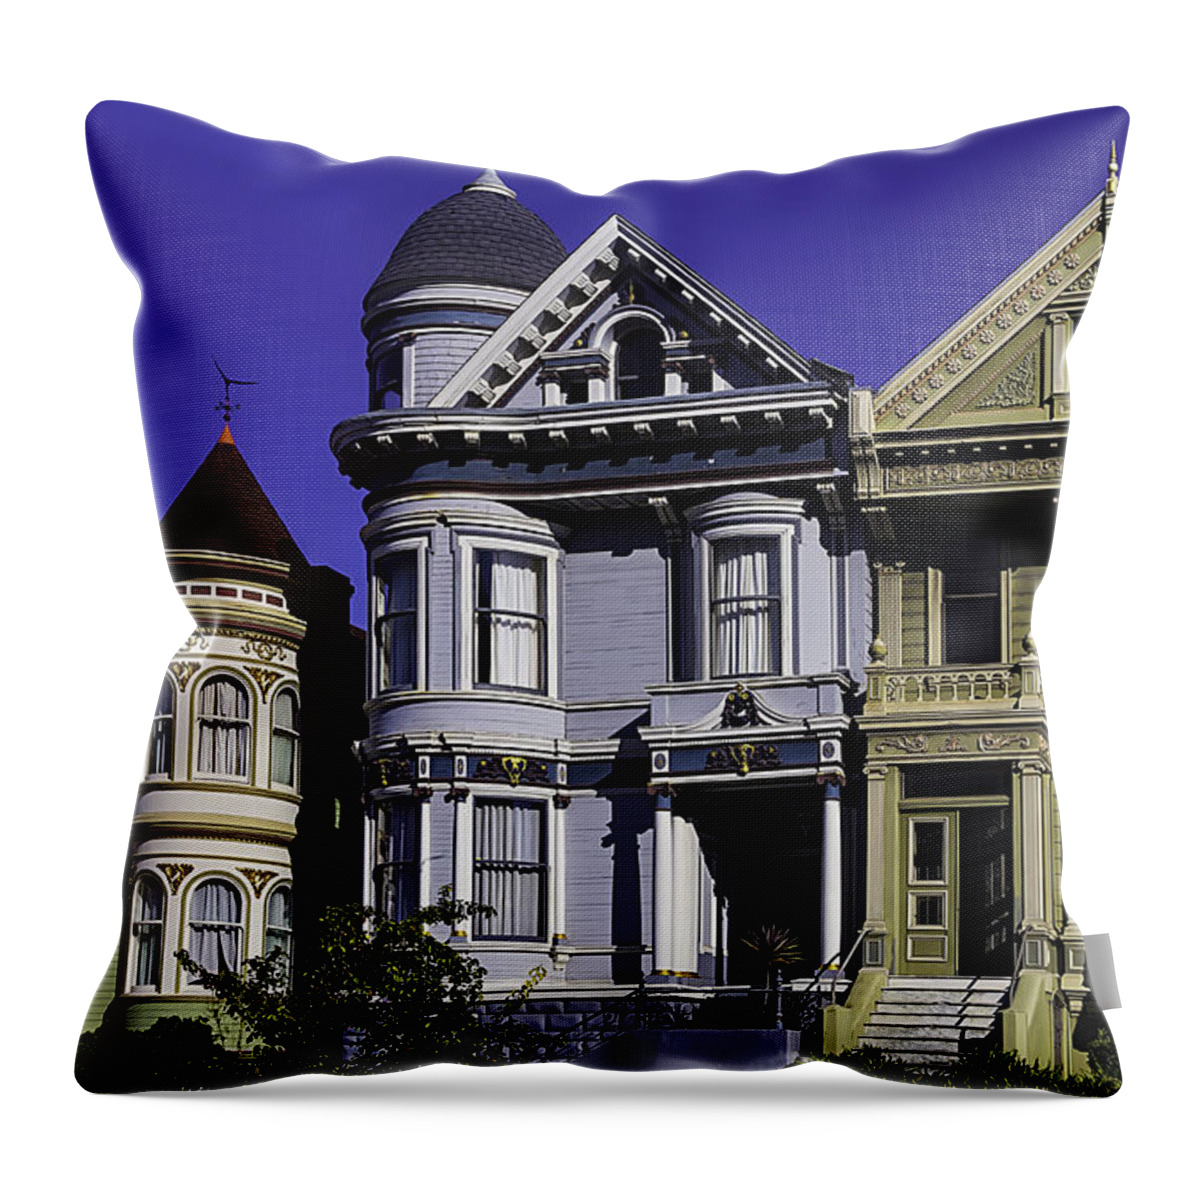 Victorian Throw Pillow featuring the photograph Wonderful Victorians by Garry Gay